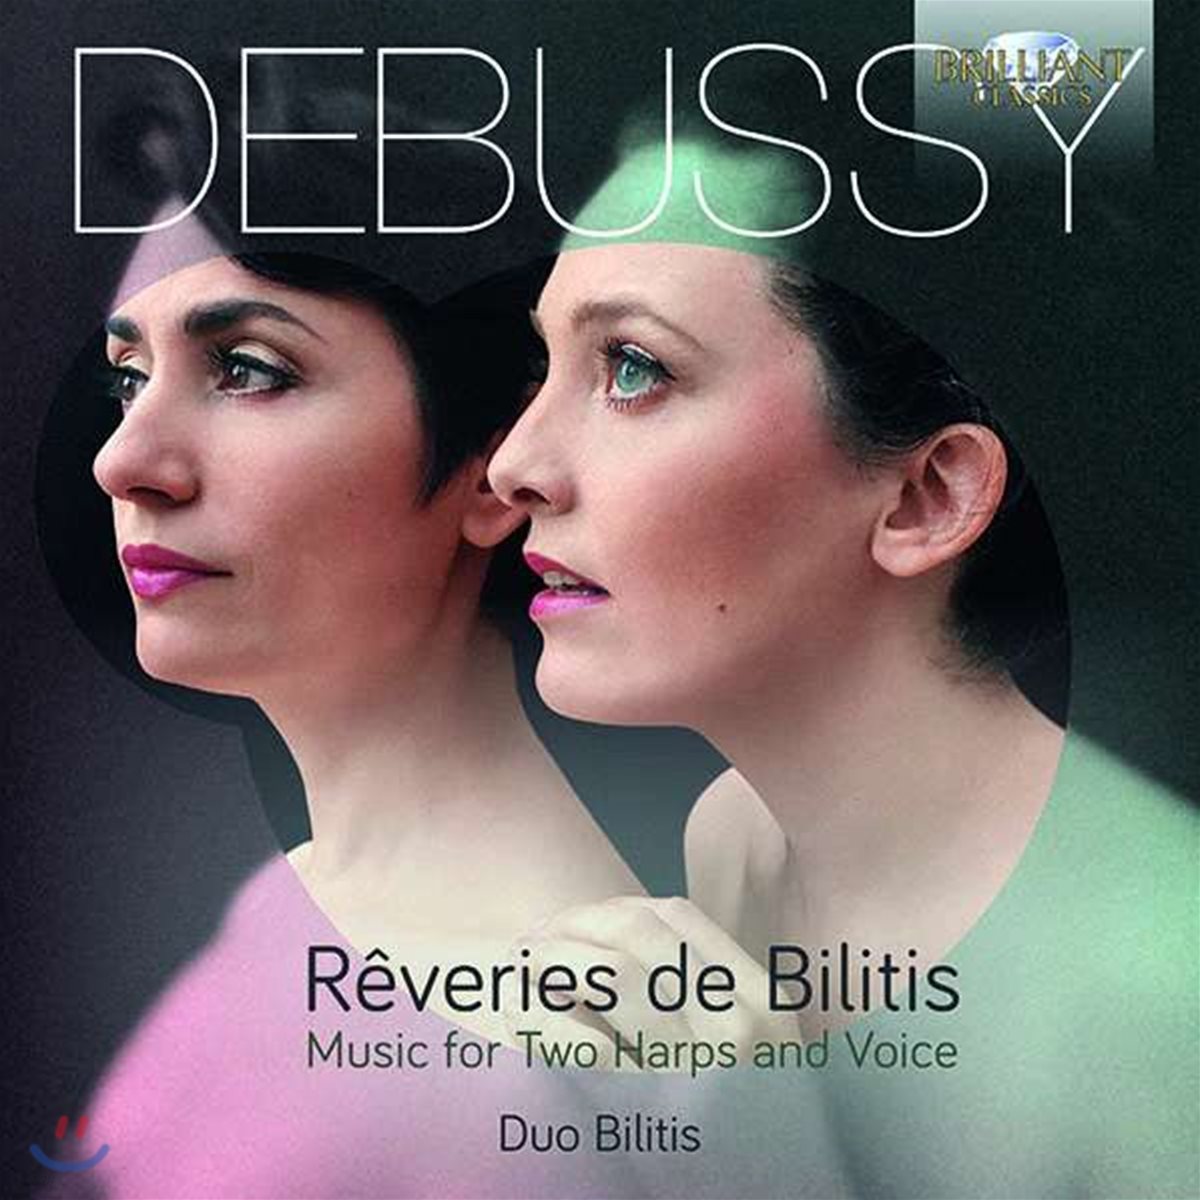 Duo Bilities 드뷔시: 두 대의 하프와 성악을 위한 작품집 (Debussy: Reveries de Bilitis &#39;Music For Two Harps And Voice&#39;)